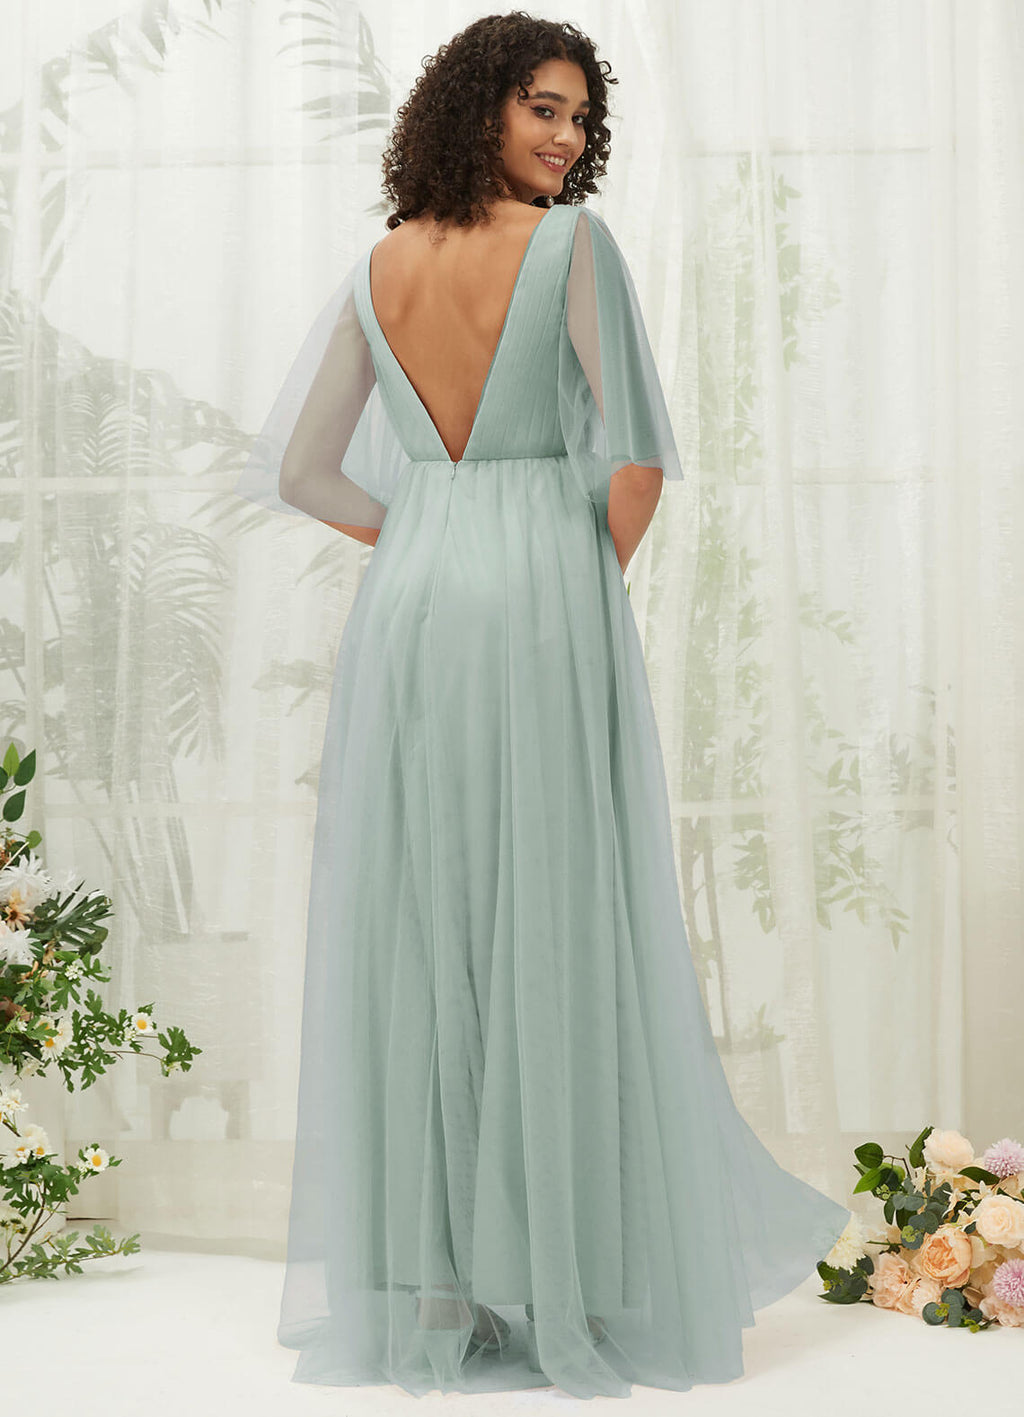 NZ Bridal Sage Green Tulle Maxi Backless bridesmaid dresses With Pocket R1026 Thea a